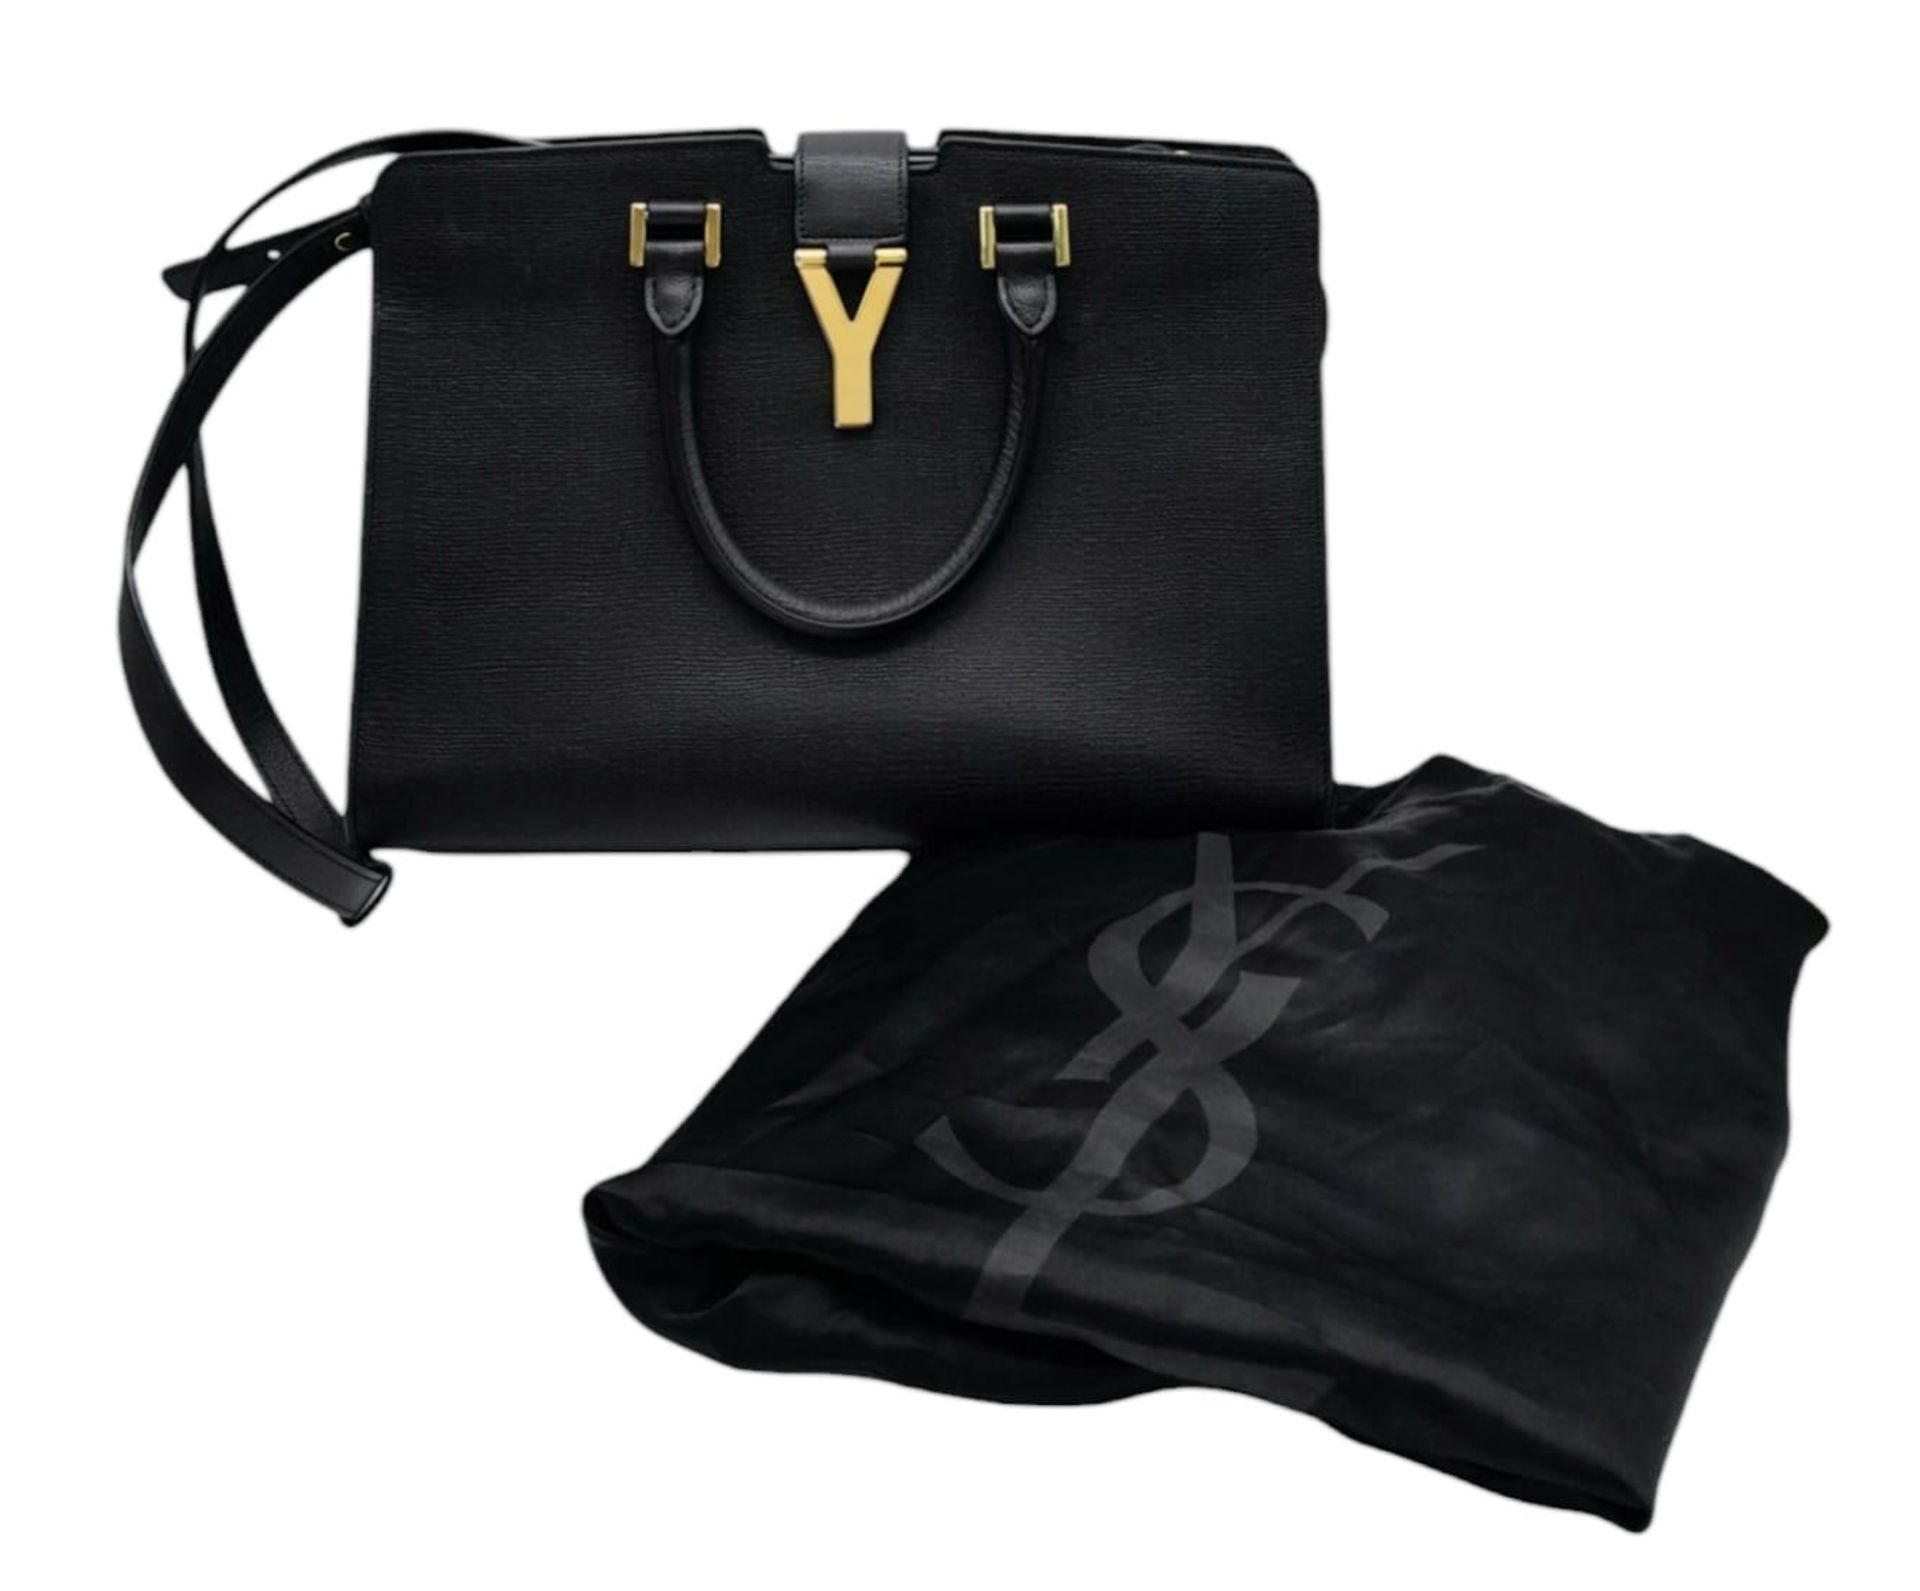 An Yves Saint Laurent Black 'Cabas' Handbag. Leather exterior with gold-toned hardware, two rolled - Bild 2 aus 8